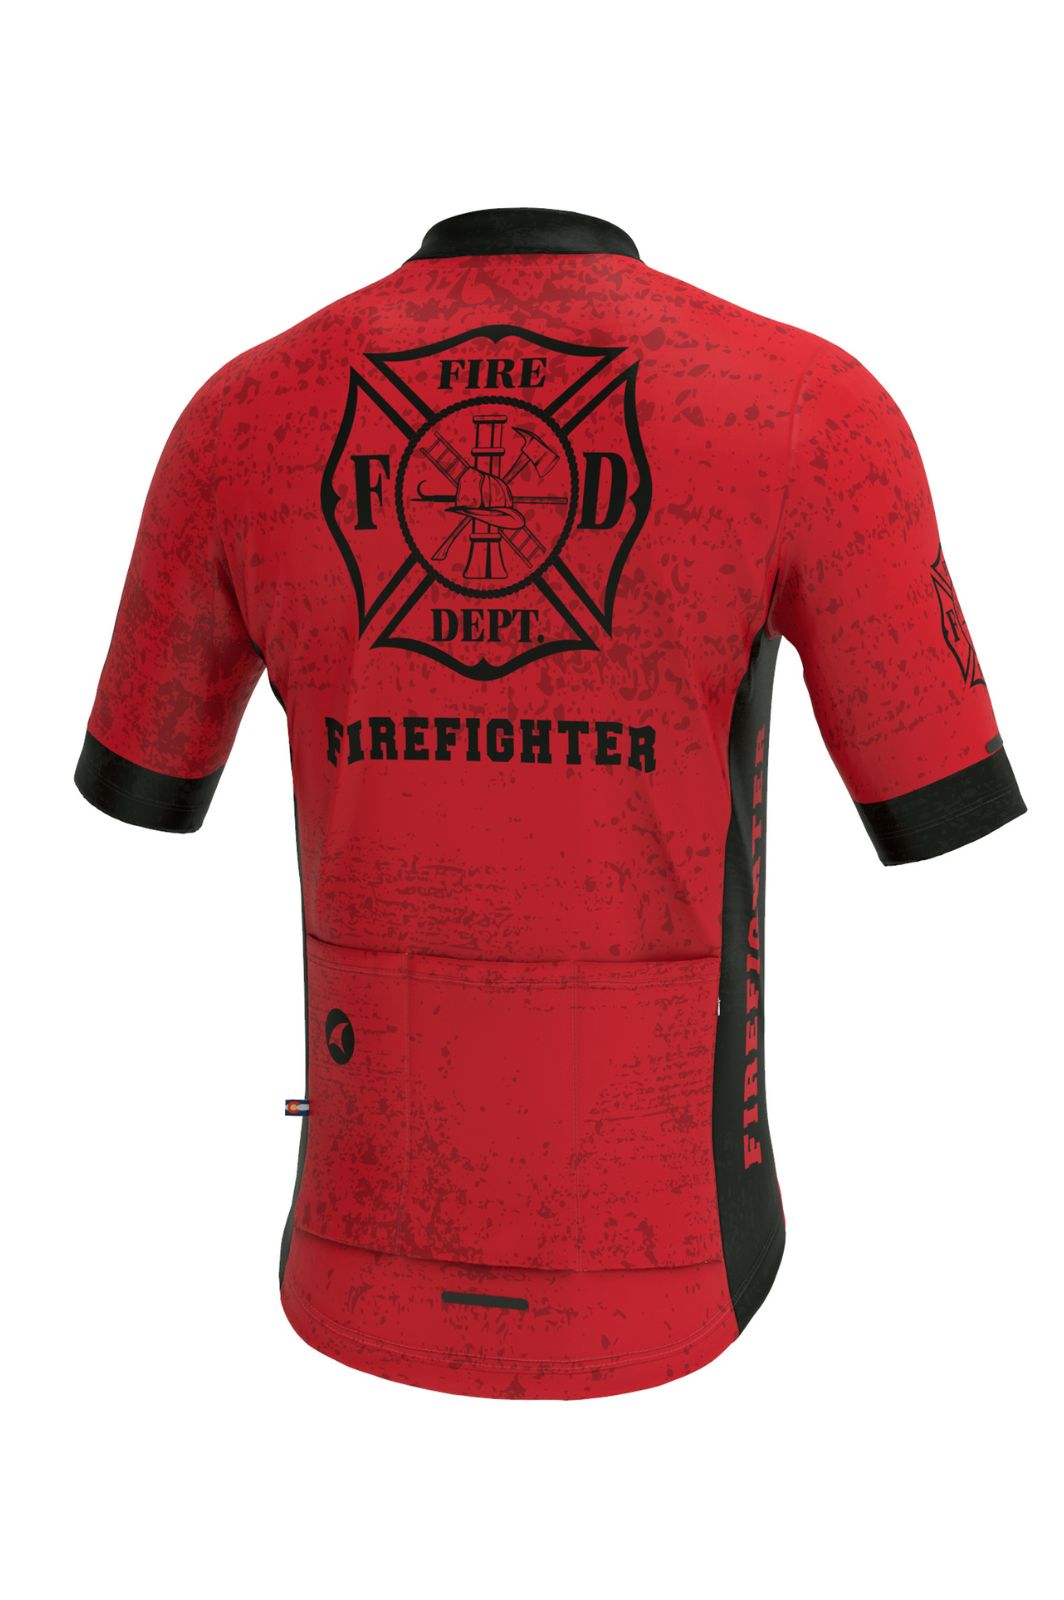 Men's First Responder Firefighter Cycling Jersey - Back View